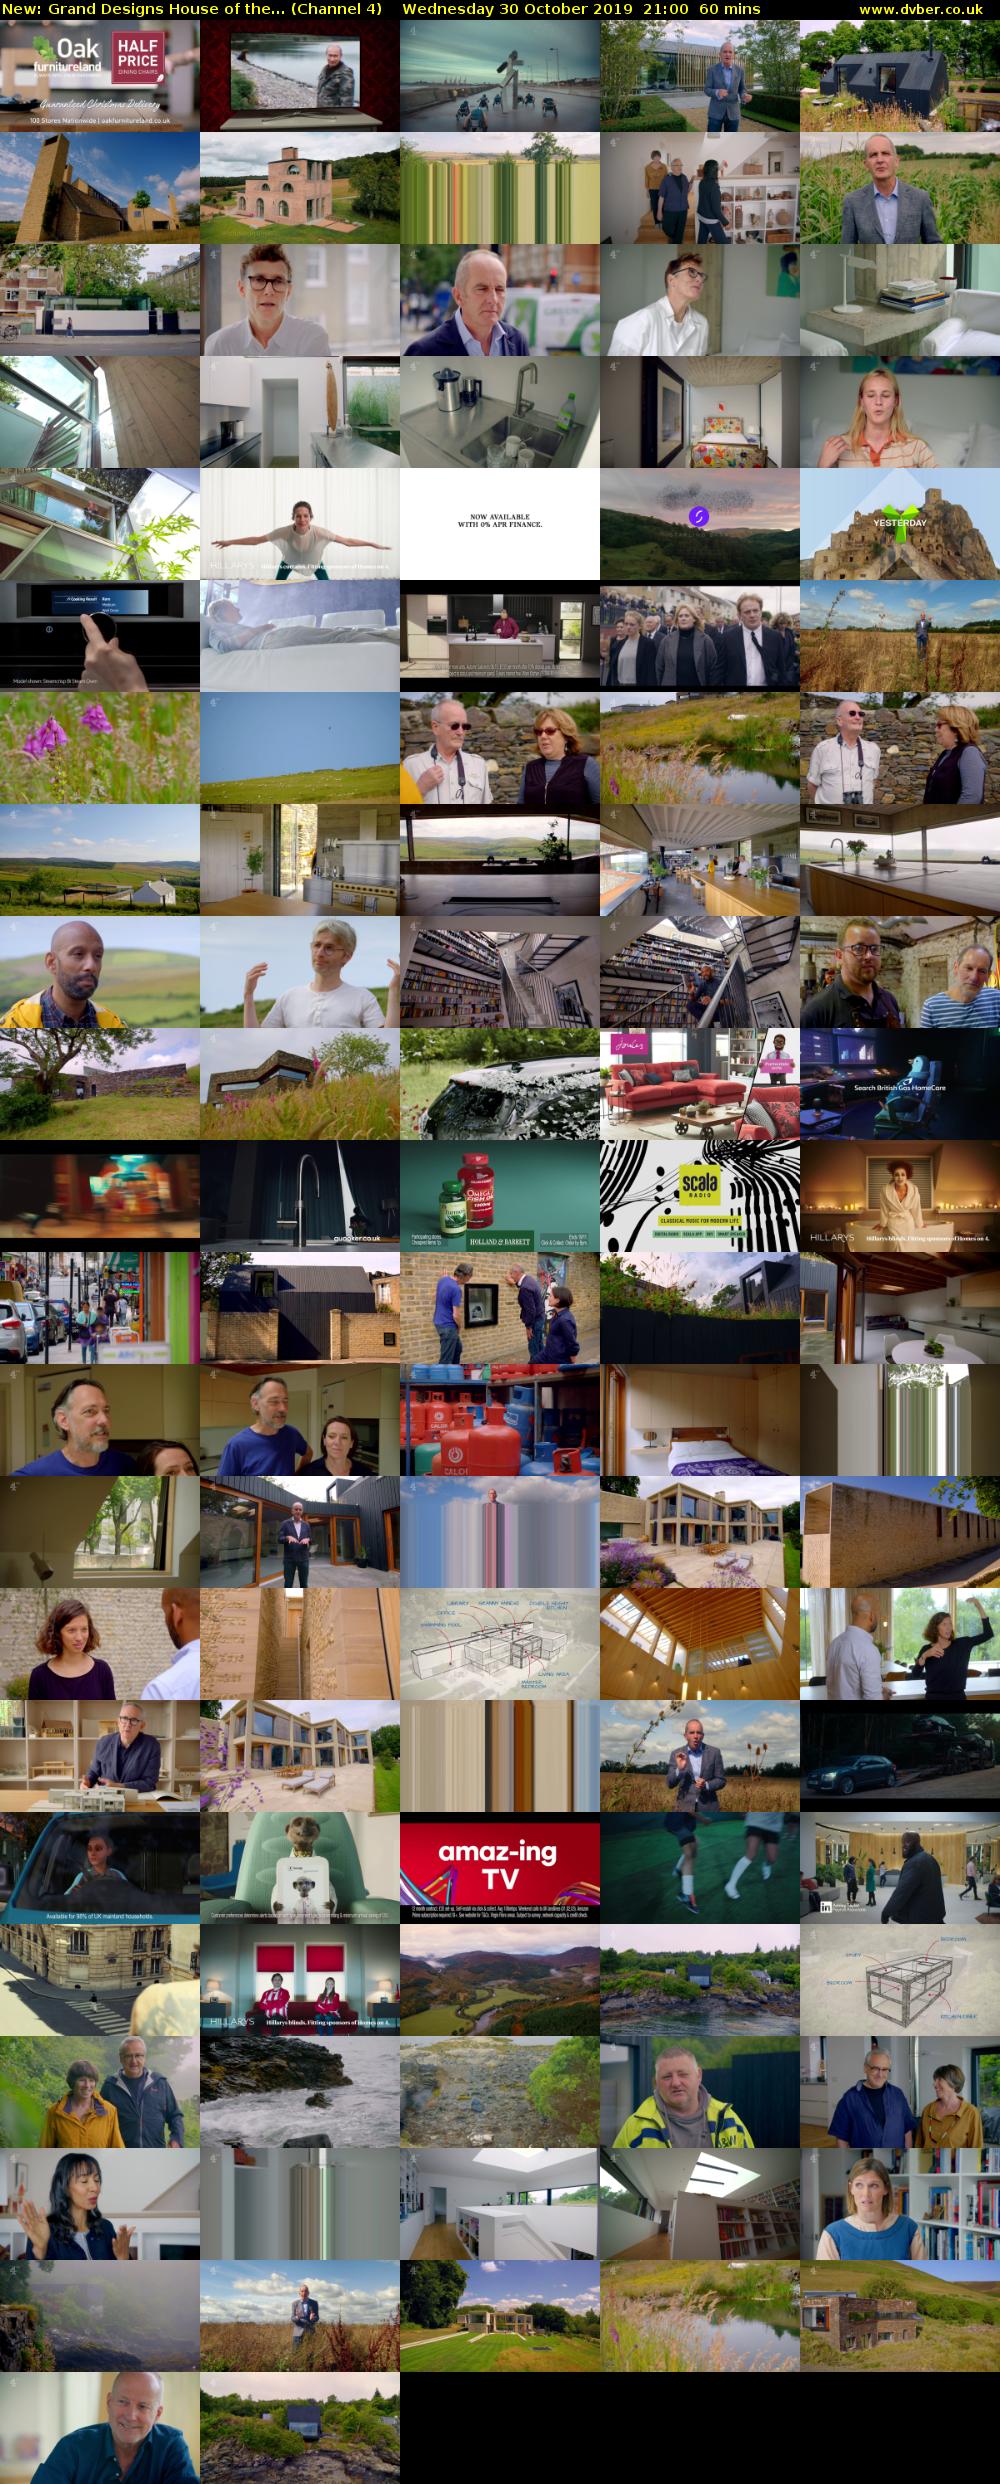 Grand Designs House of the... (Channel 4) Wednesday 30 October 2019 21:00 - 22:00